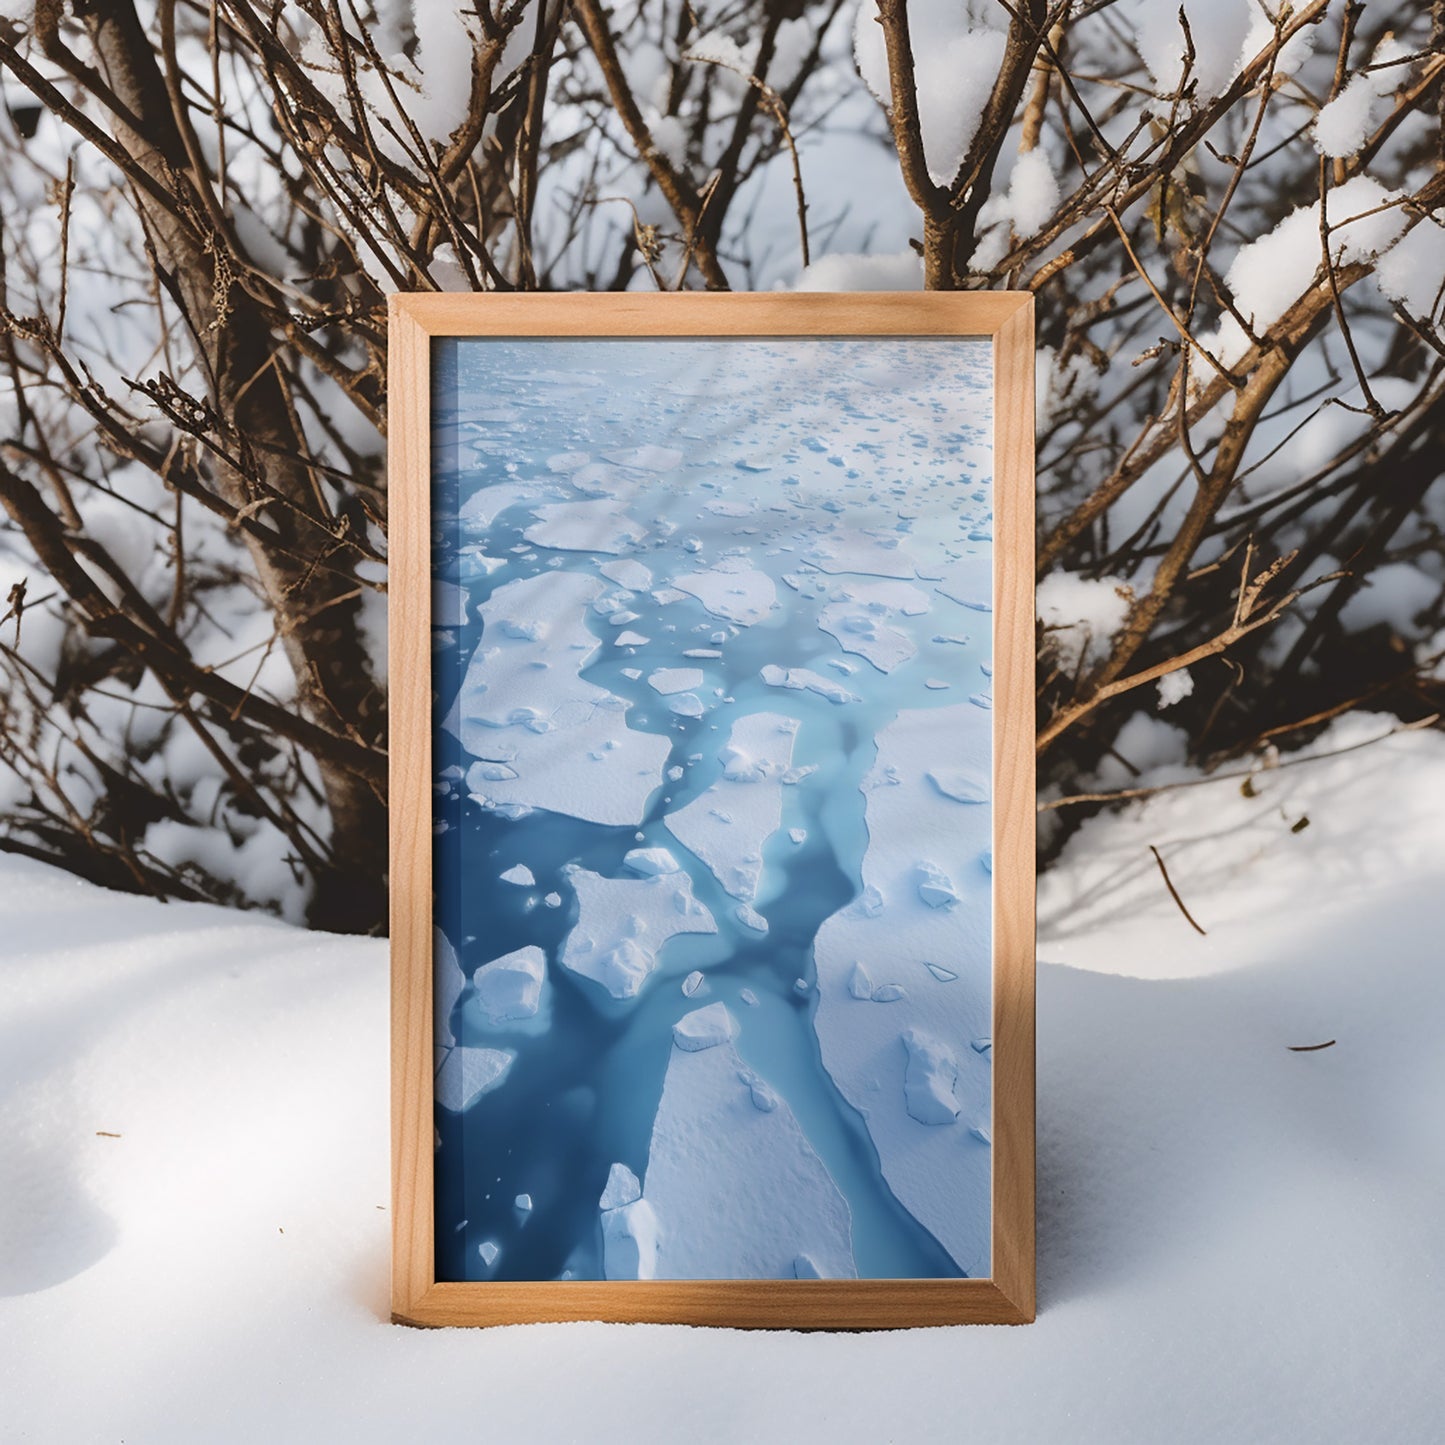 A framed picture of a blue sky with clouds placed upright on snow-covered ground.